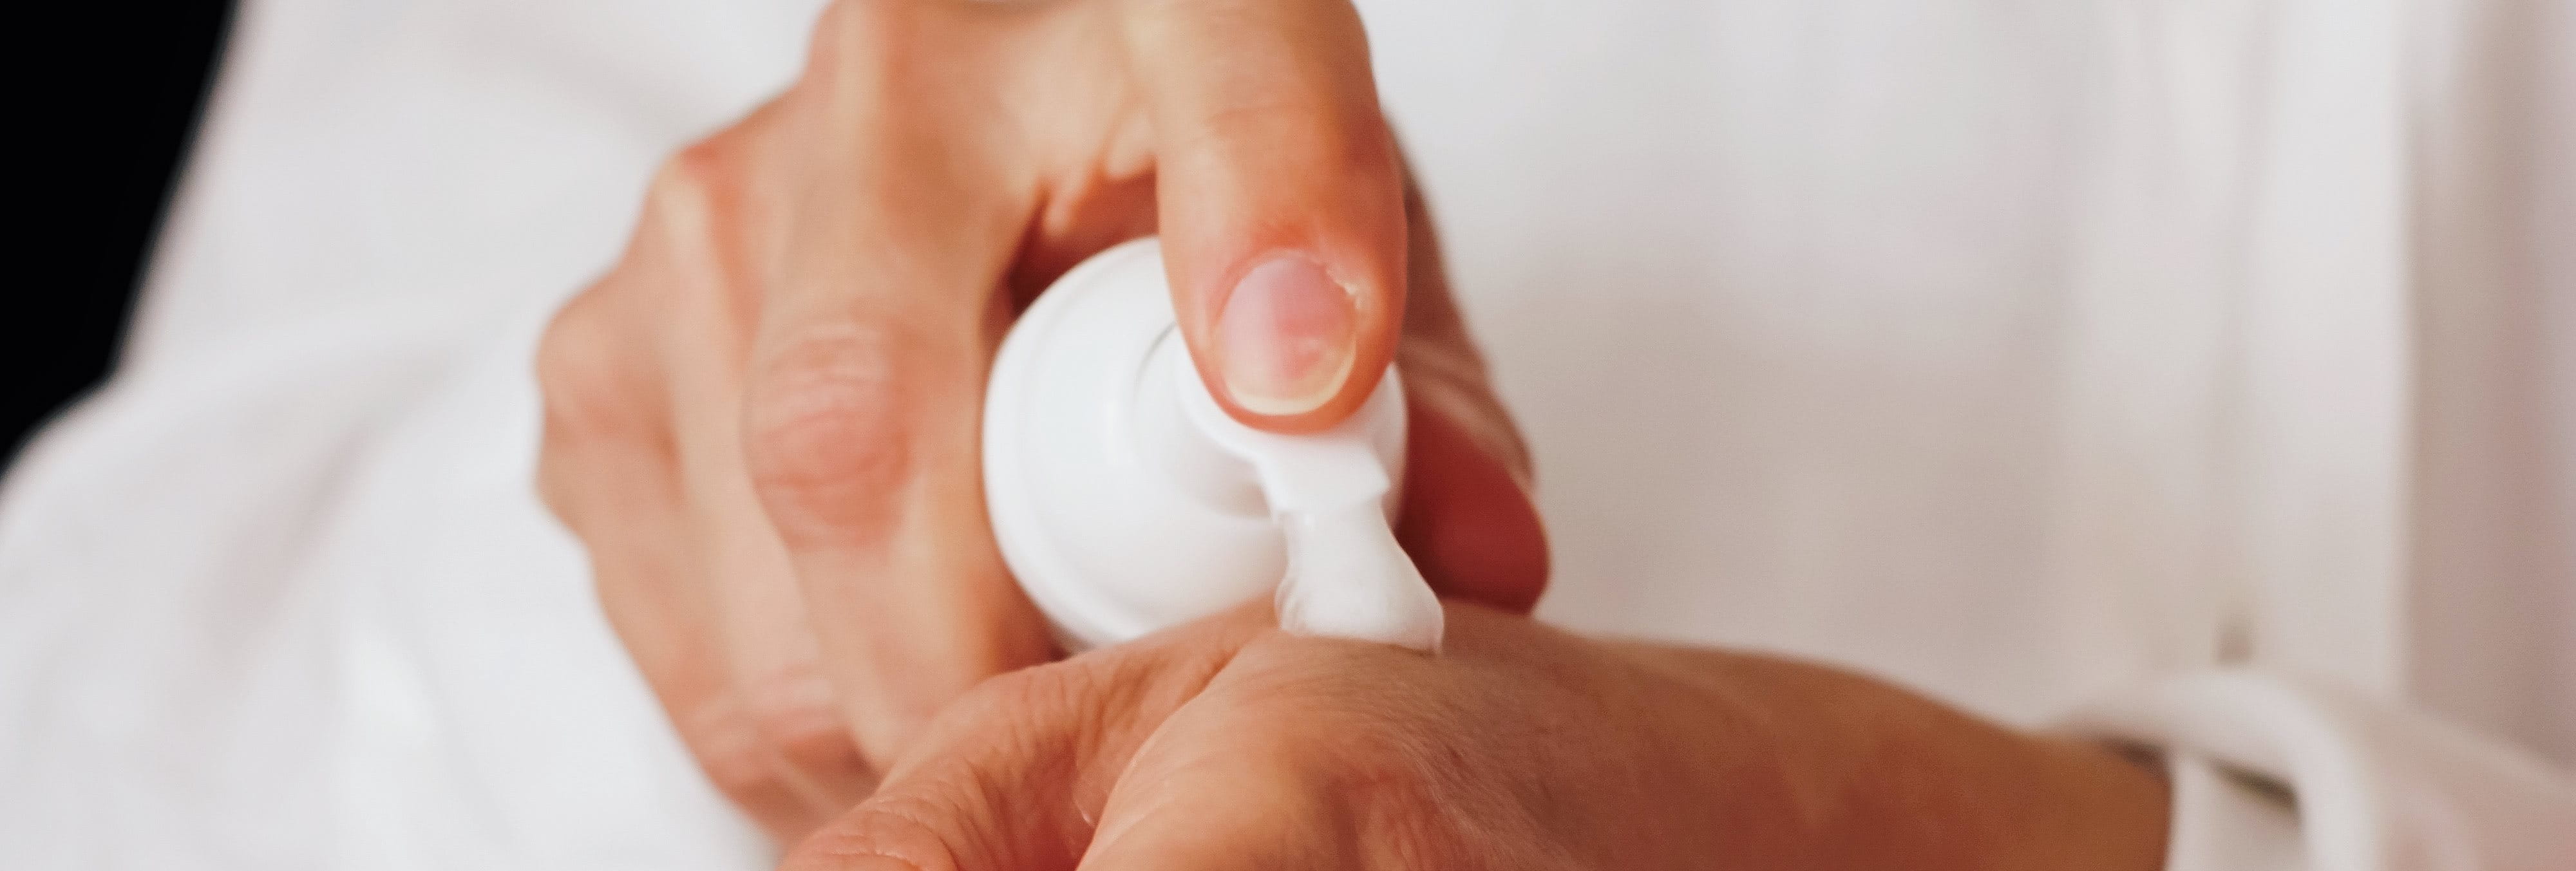 Applying lotion to hands